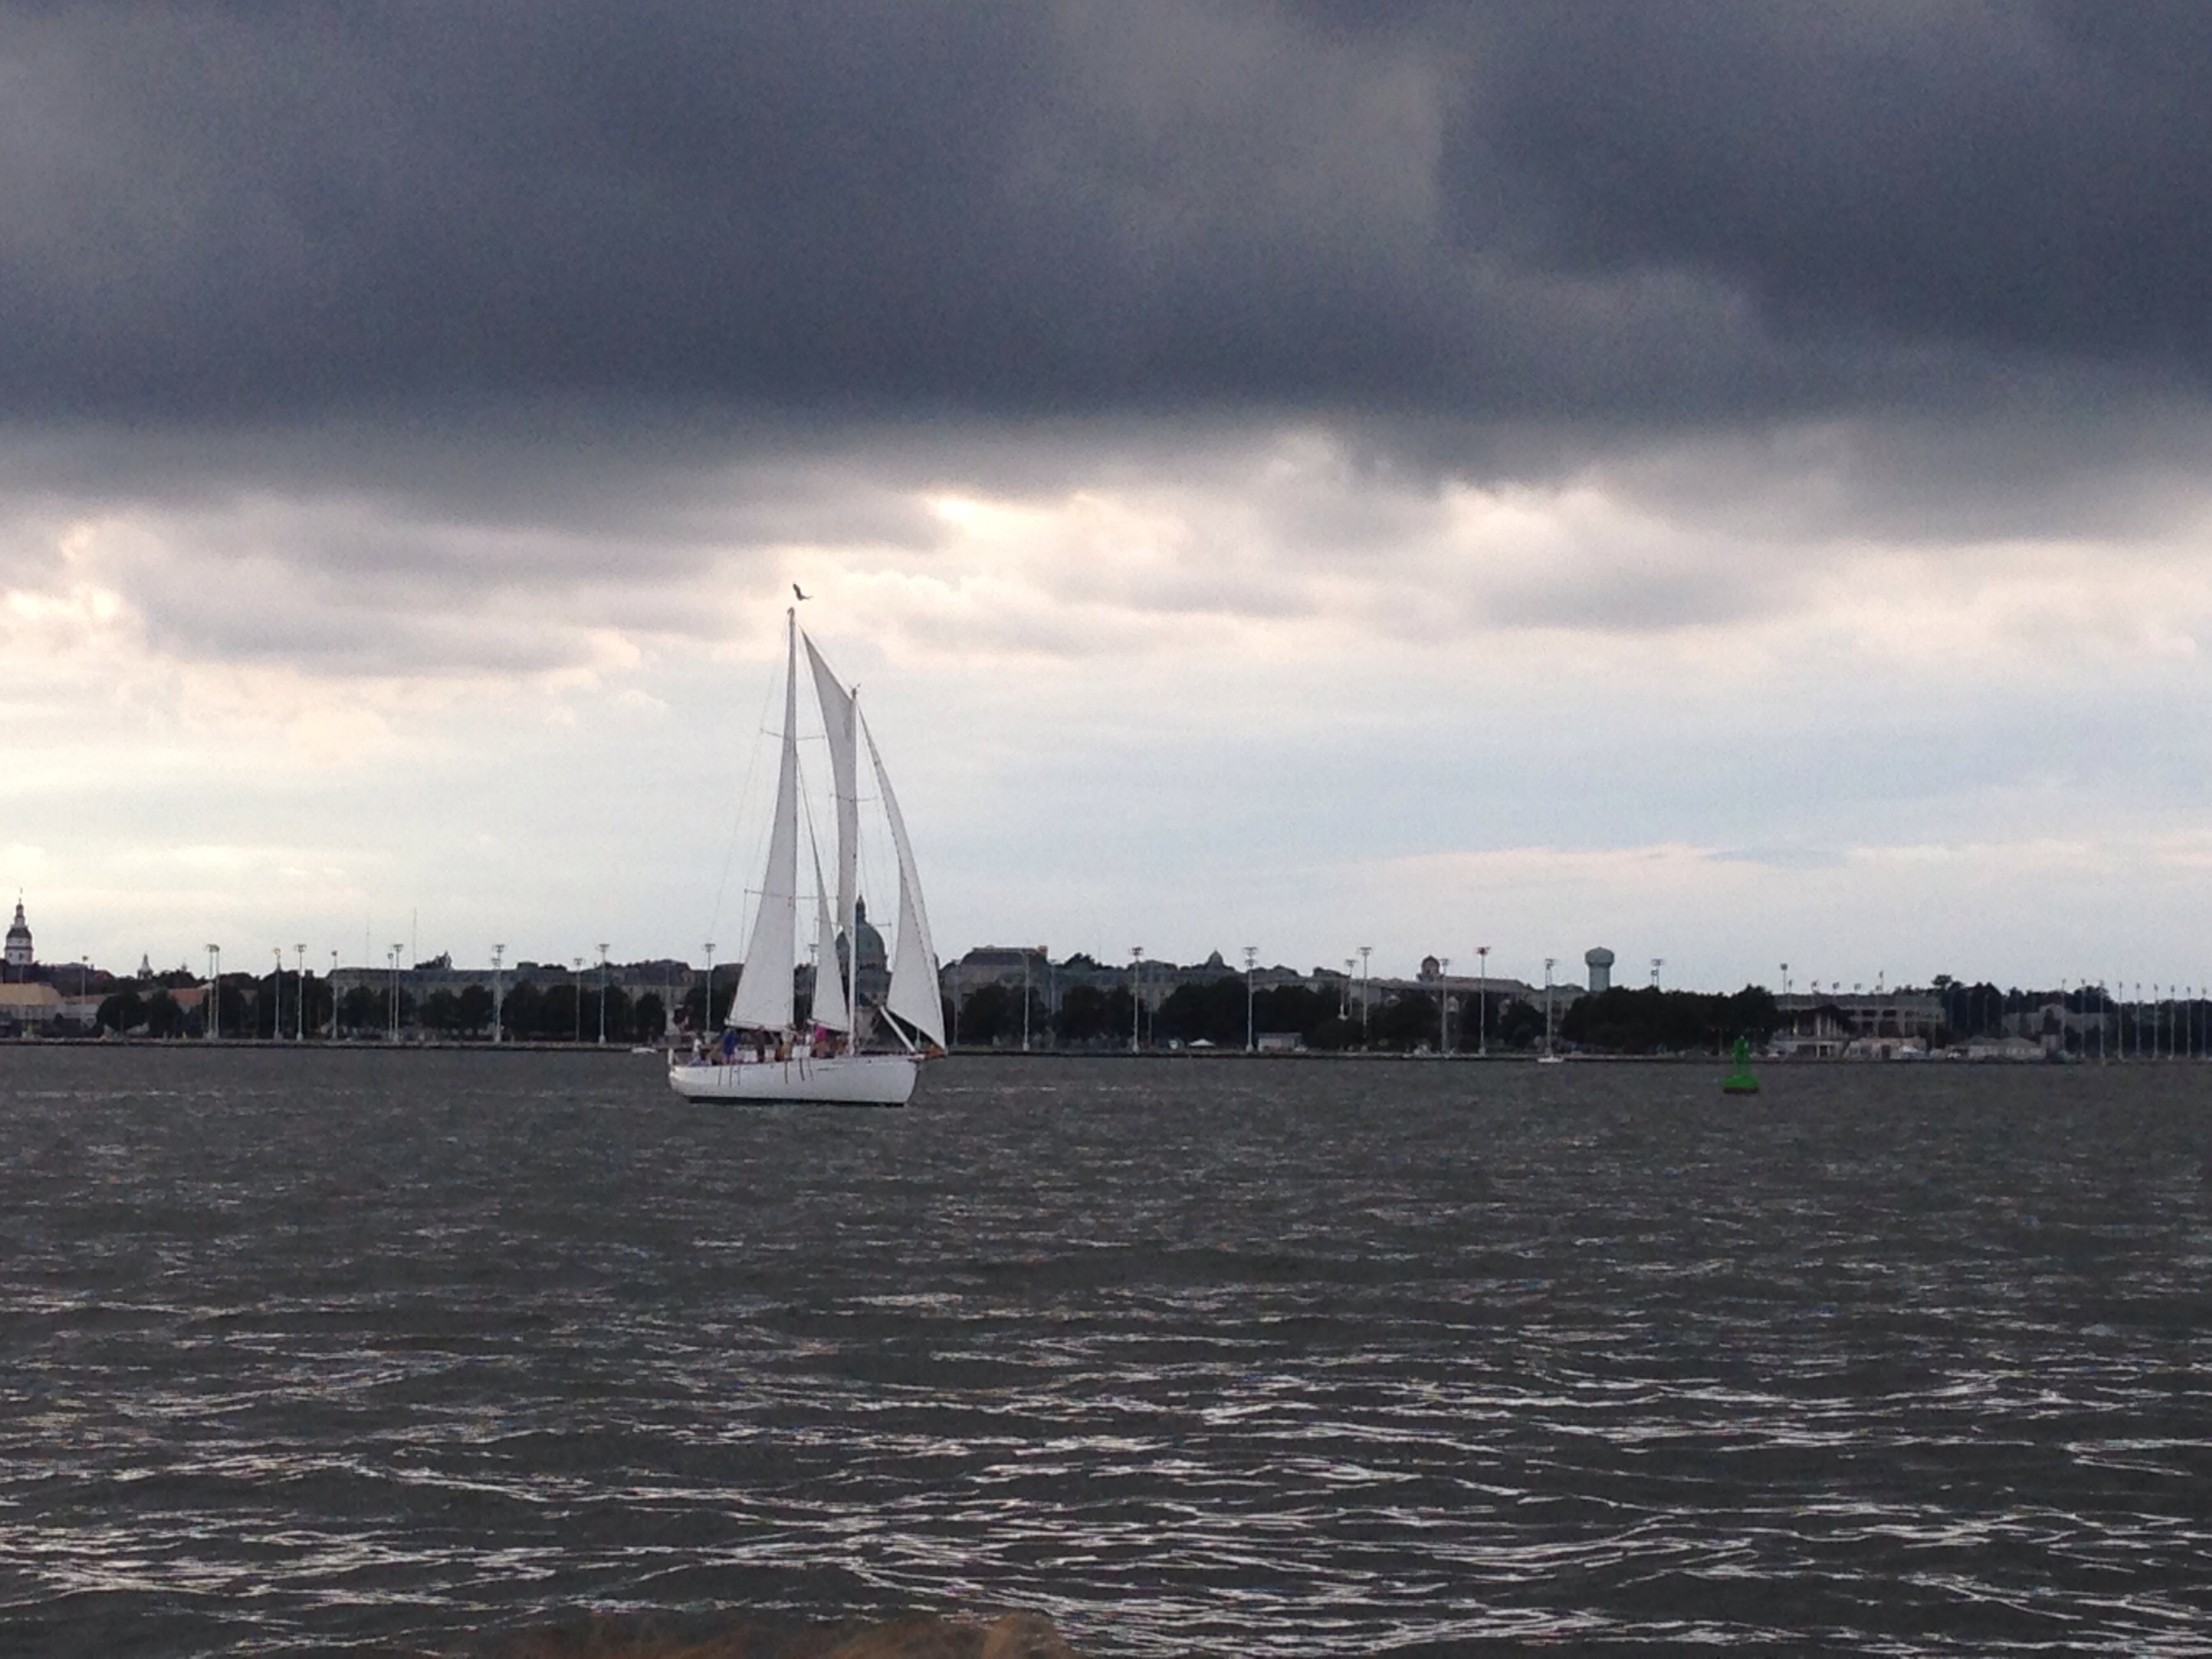 Cloudy sailing day with lots of wind